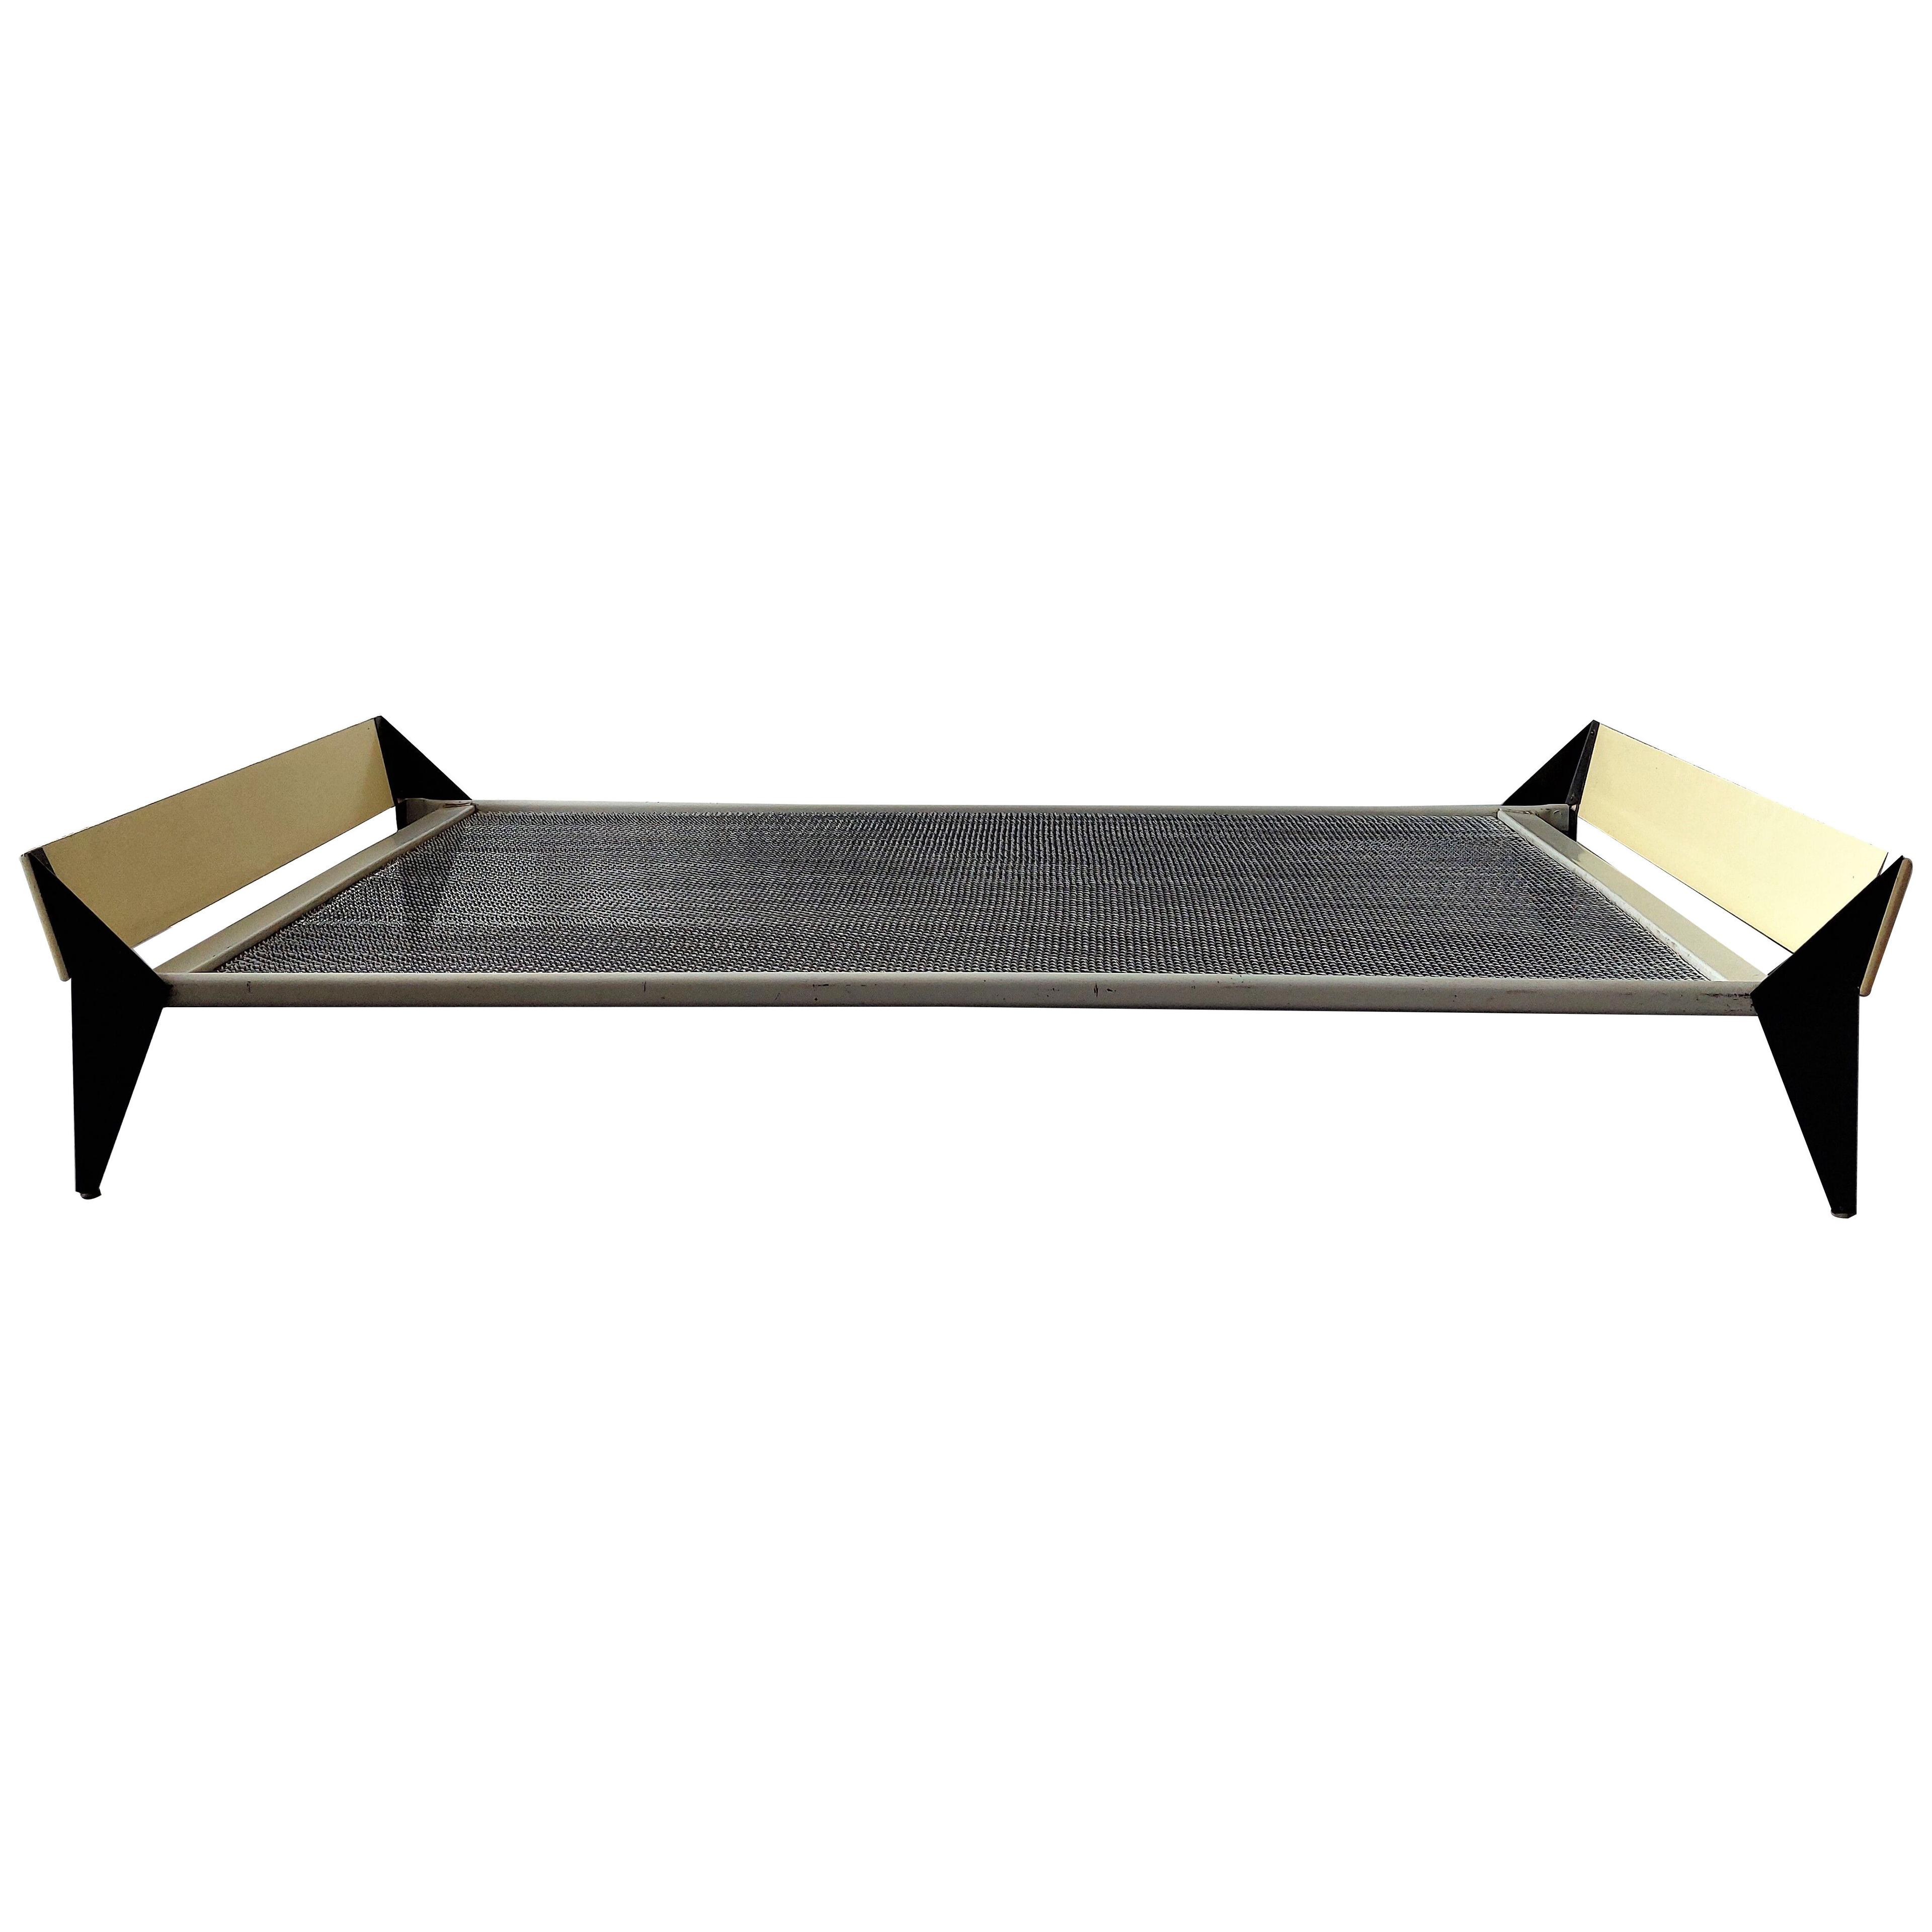 Daybed by Parry (attr.) and Truijen (attr.) for DICO, The Netherlands 1950's